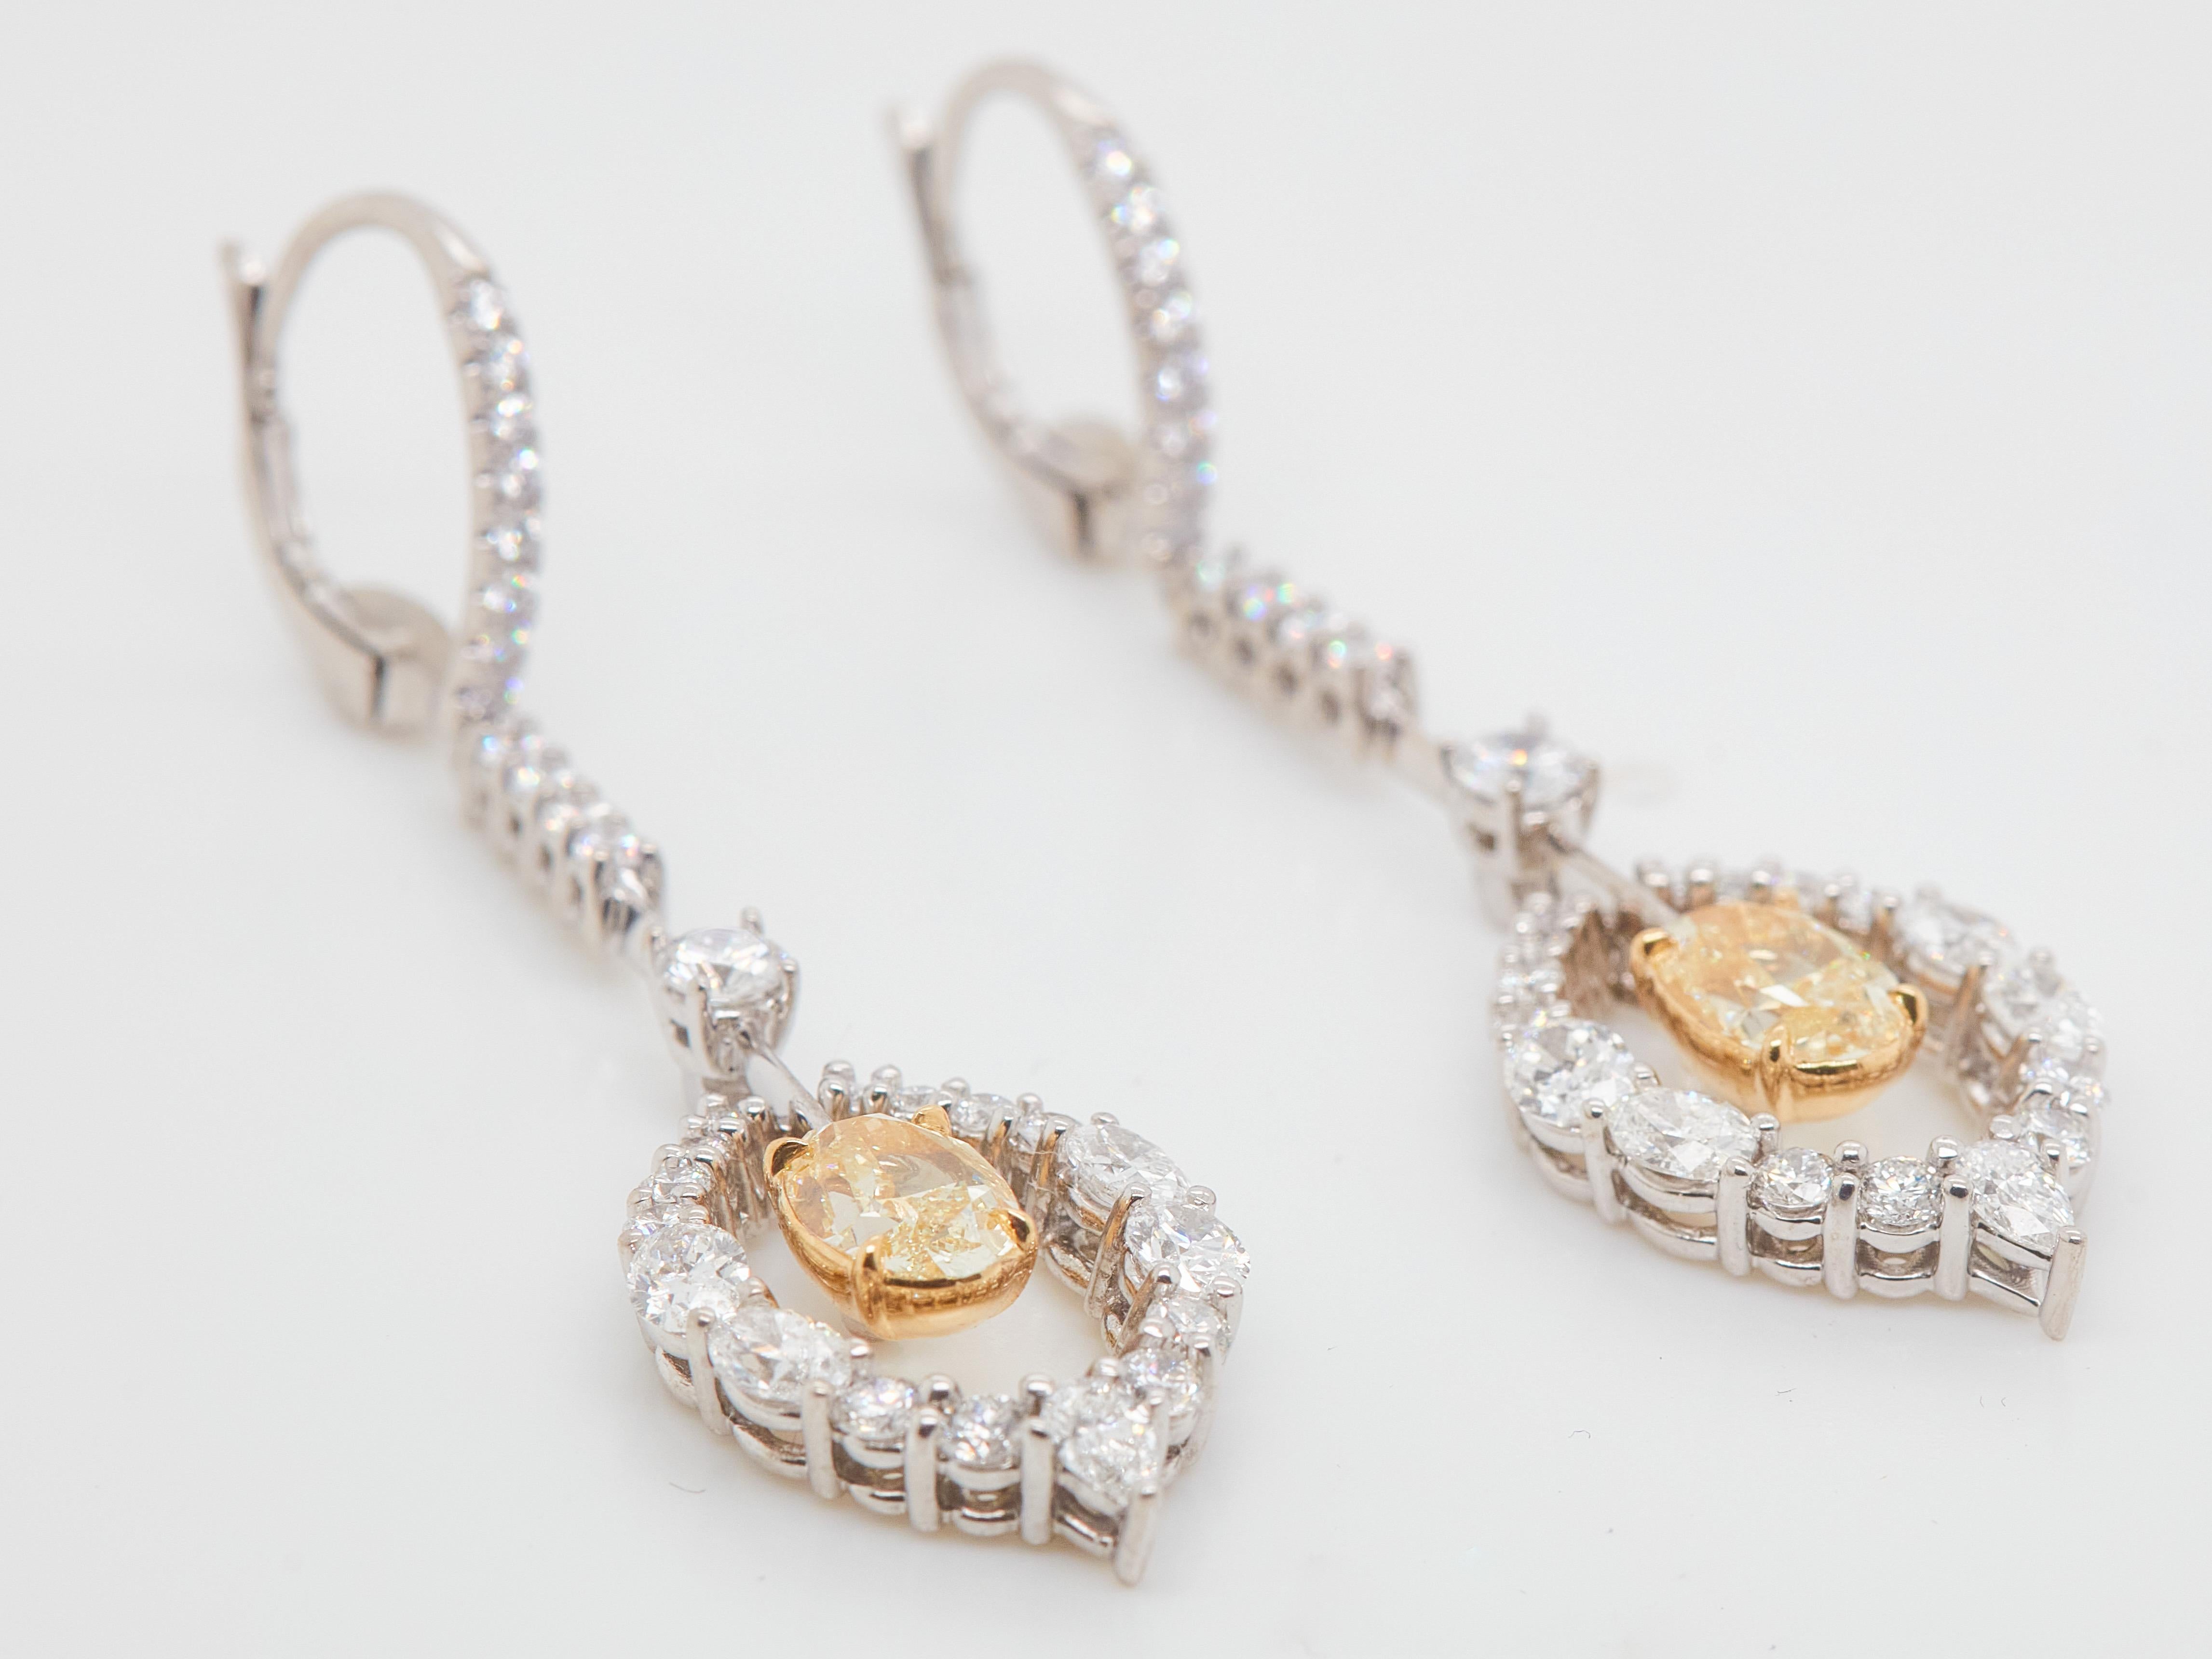 A stunning matched pair of 2.72 carat center stones, GIA Certified natural Fancy Light Yellow diamonds. 
These elegant chandelier drop earrings showcase 1.39 carat and 1.33 carat Fancy Light yellow oval-cut diamonds that surrounded by approximately